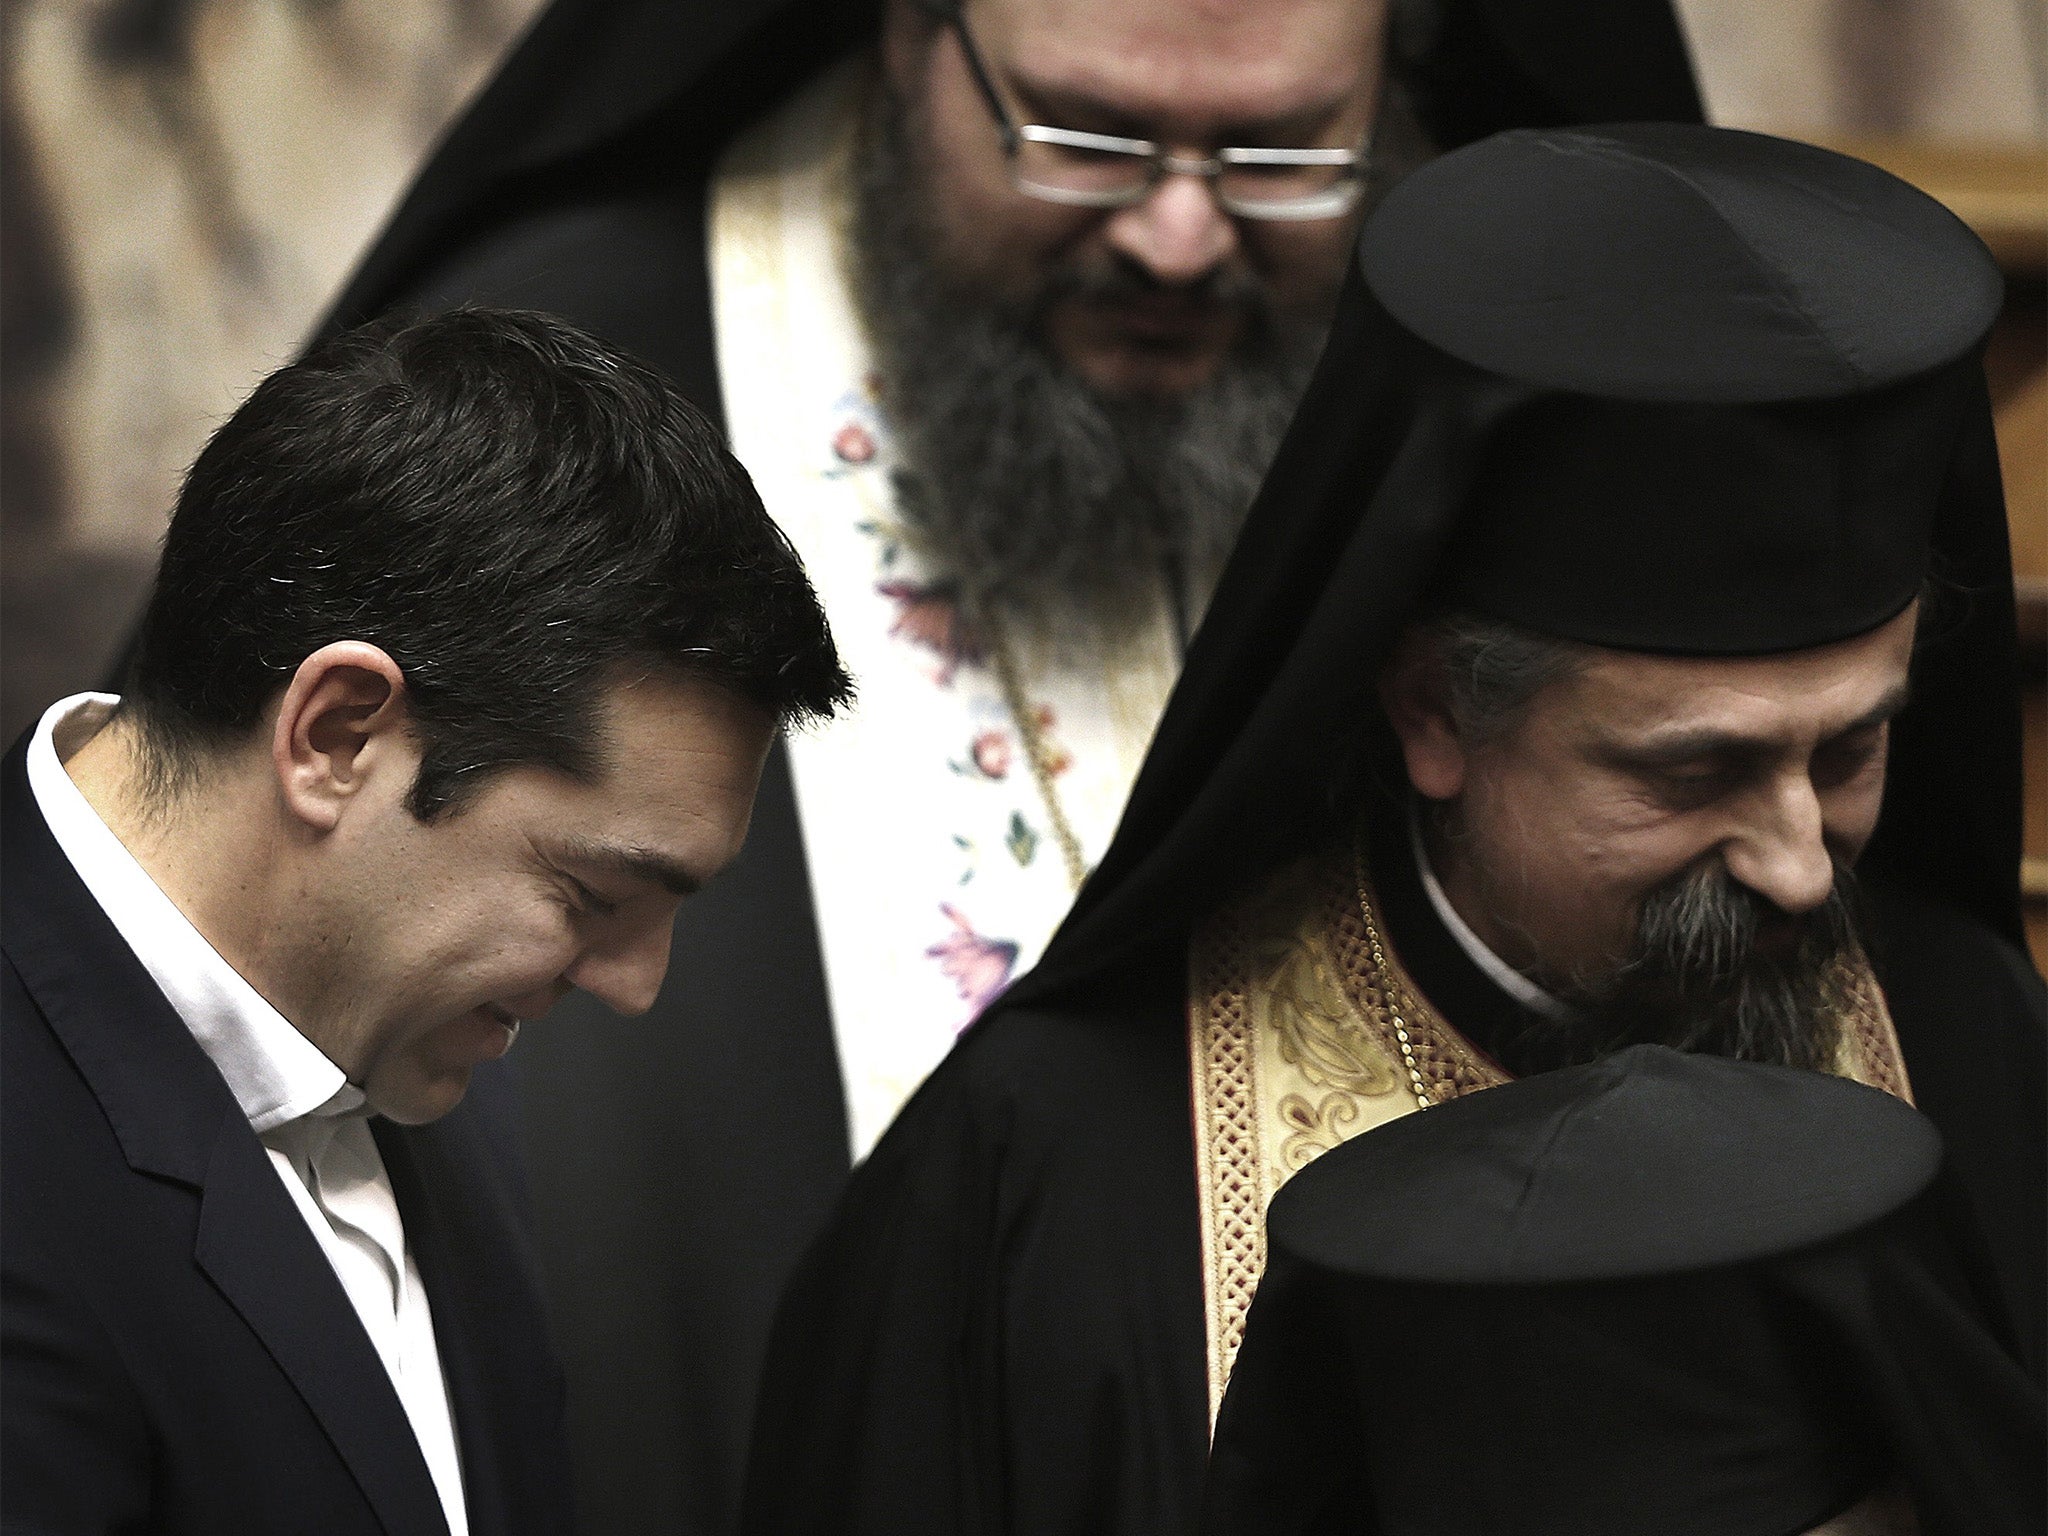 The Holy Synod, the executive arm of the Greek church, said the measure was needed to allow its charitable work to continue.